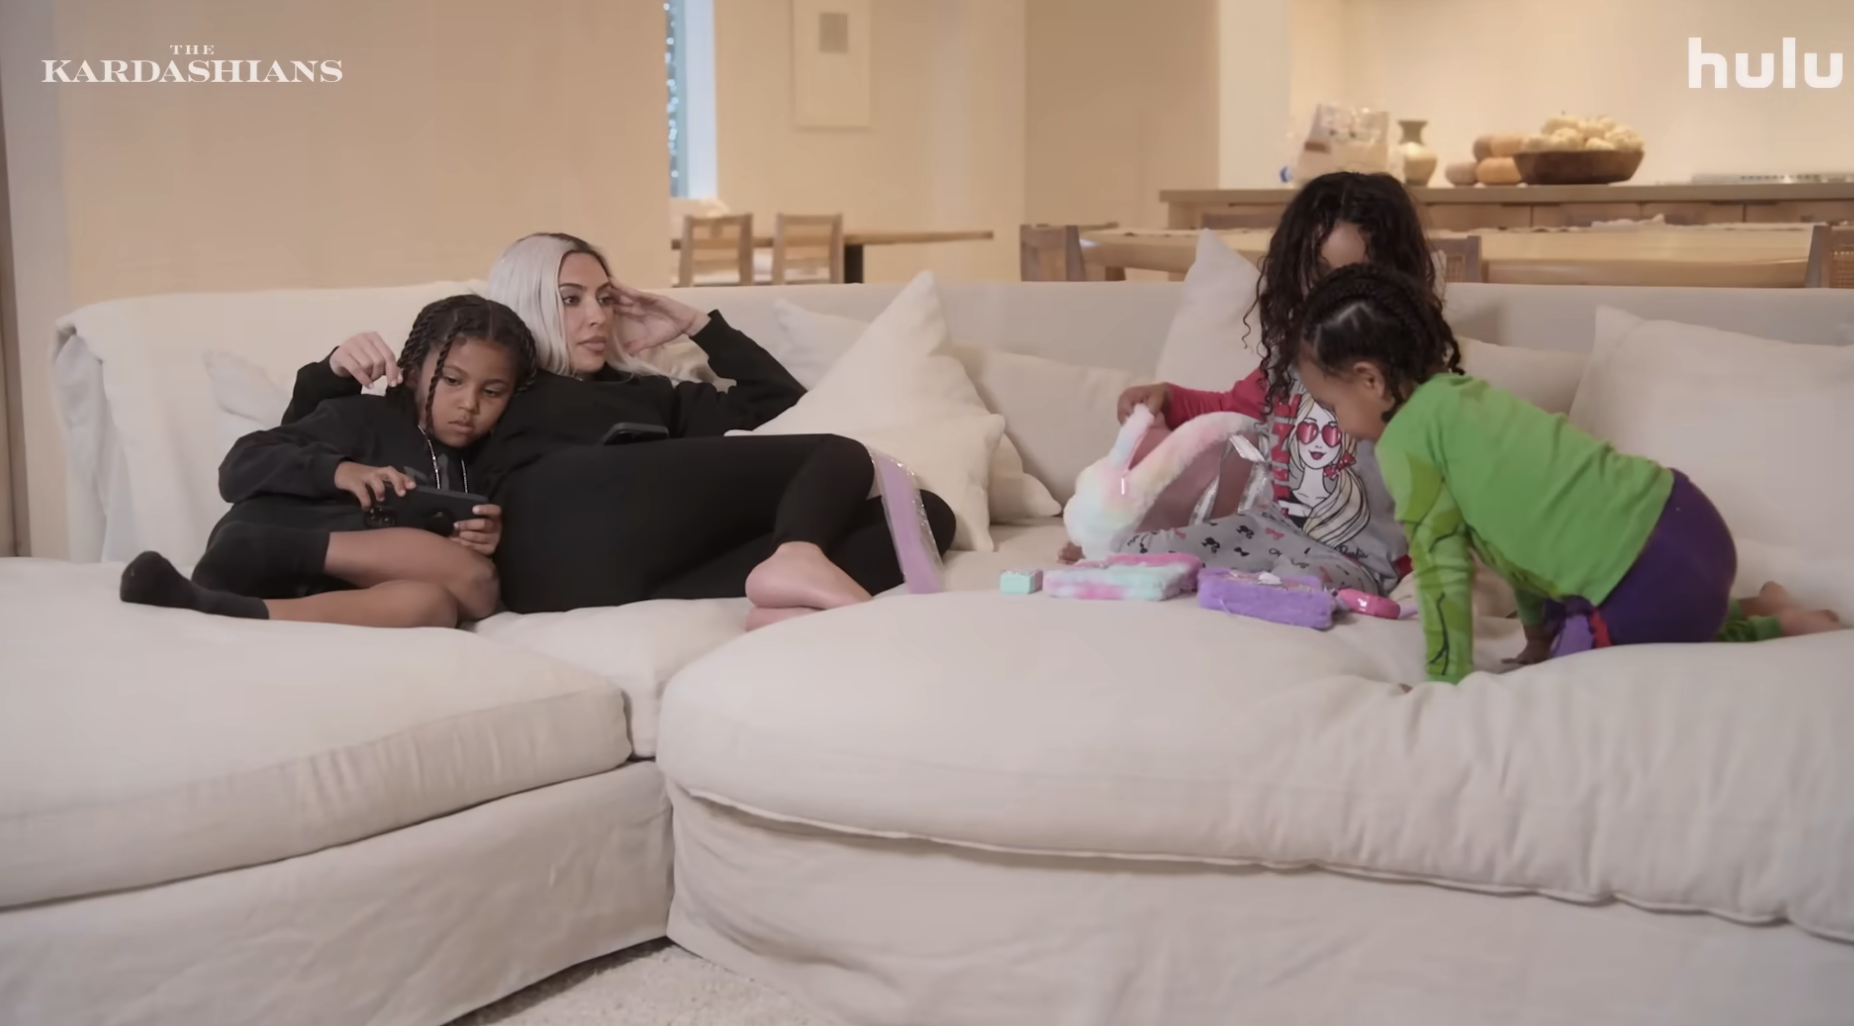 Kim with three of her children on a couch